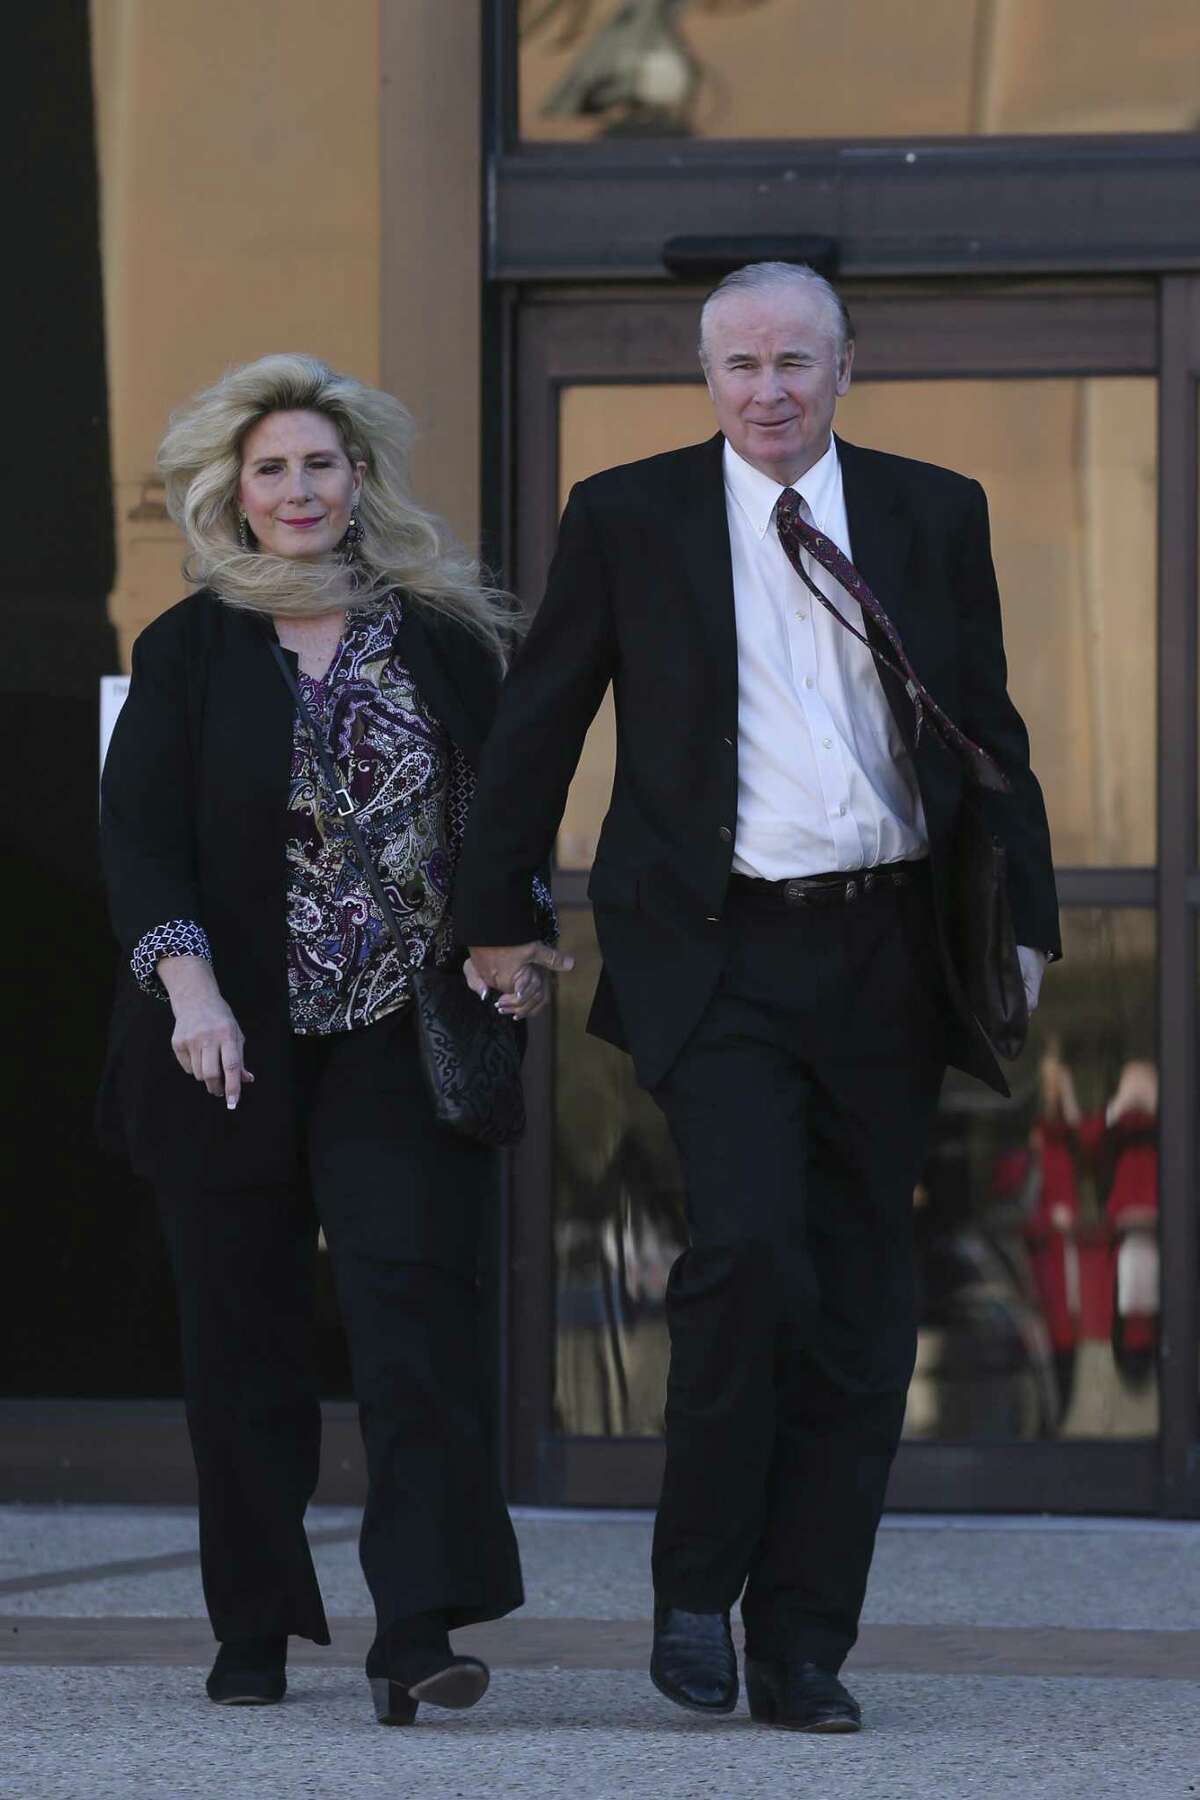 Prosecution witnesses Richard and Sharlene Thum leave the John H. Woods Jr. U.S. Courthouse during a Monday lunch break in the criminal fraud trial of state Sen. Carlos Uresti and his co-defendant, Gary Cain. The Thums had invested with FourWinds Logistics, a bankrupt frac-sand company accused defrauding investors.